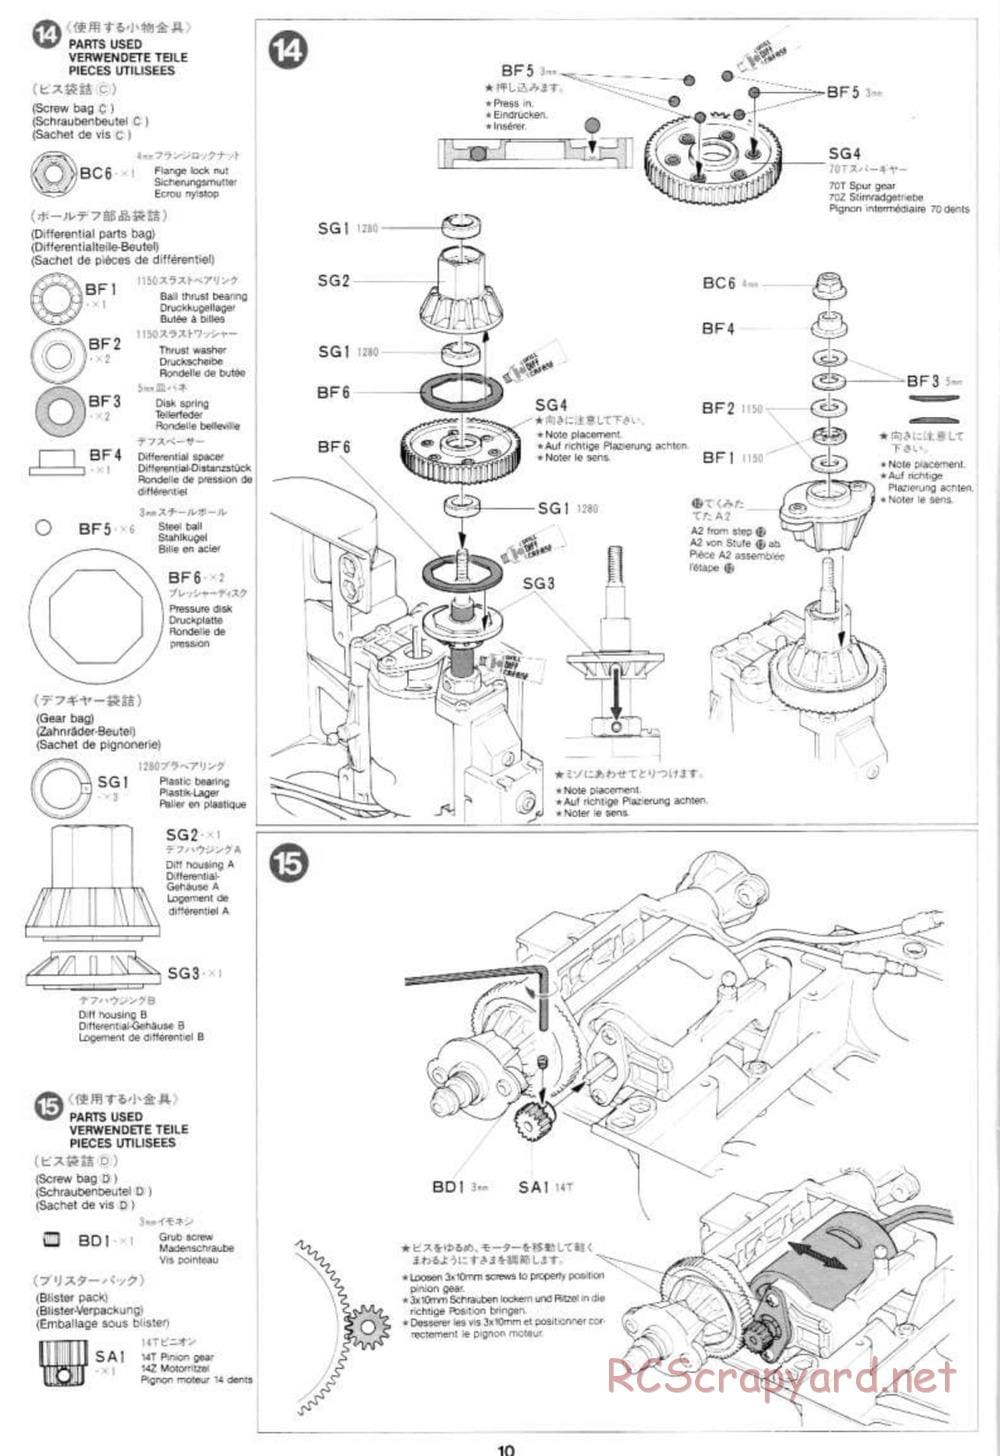 Tamiya - Mercedes-Benz C11 - Group-C Chassis - Manual - Page 10